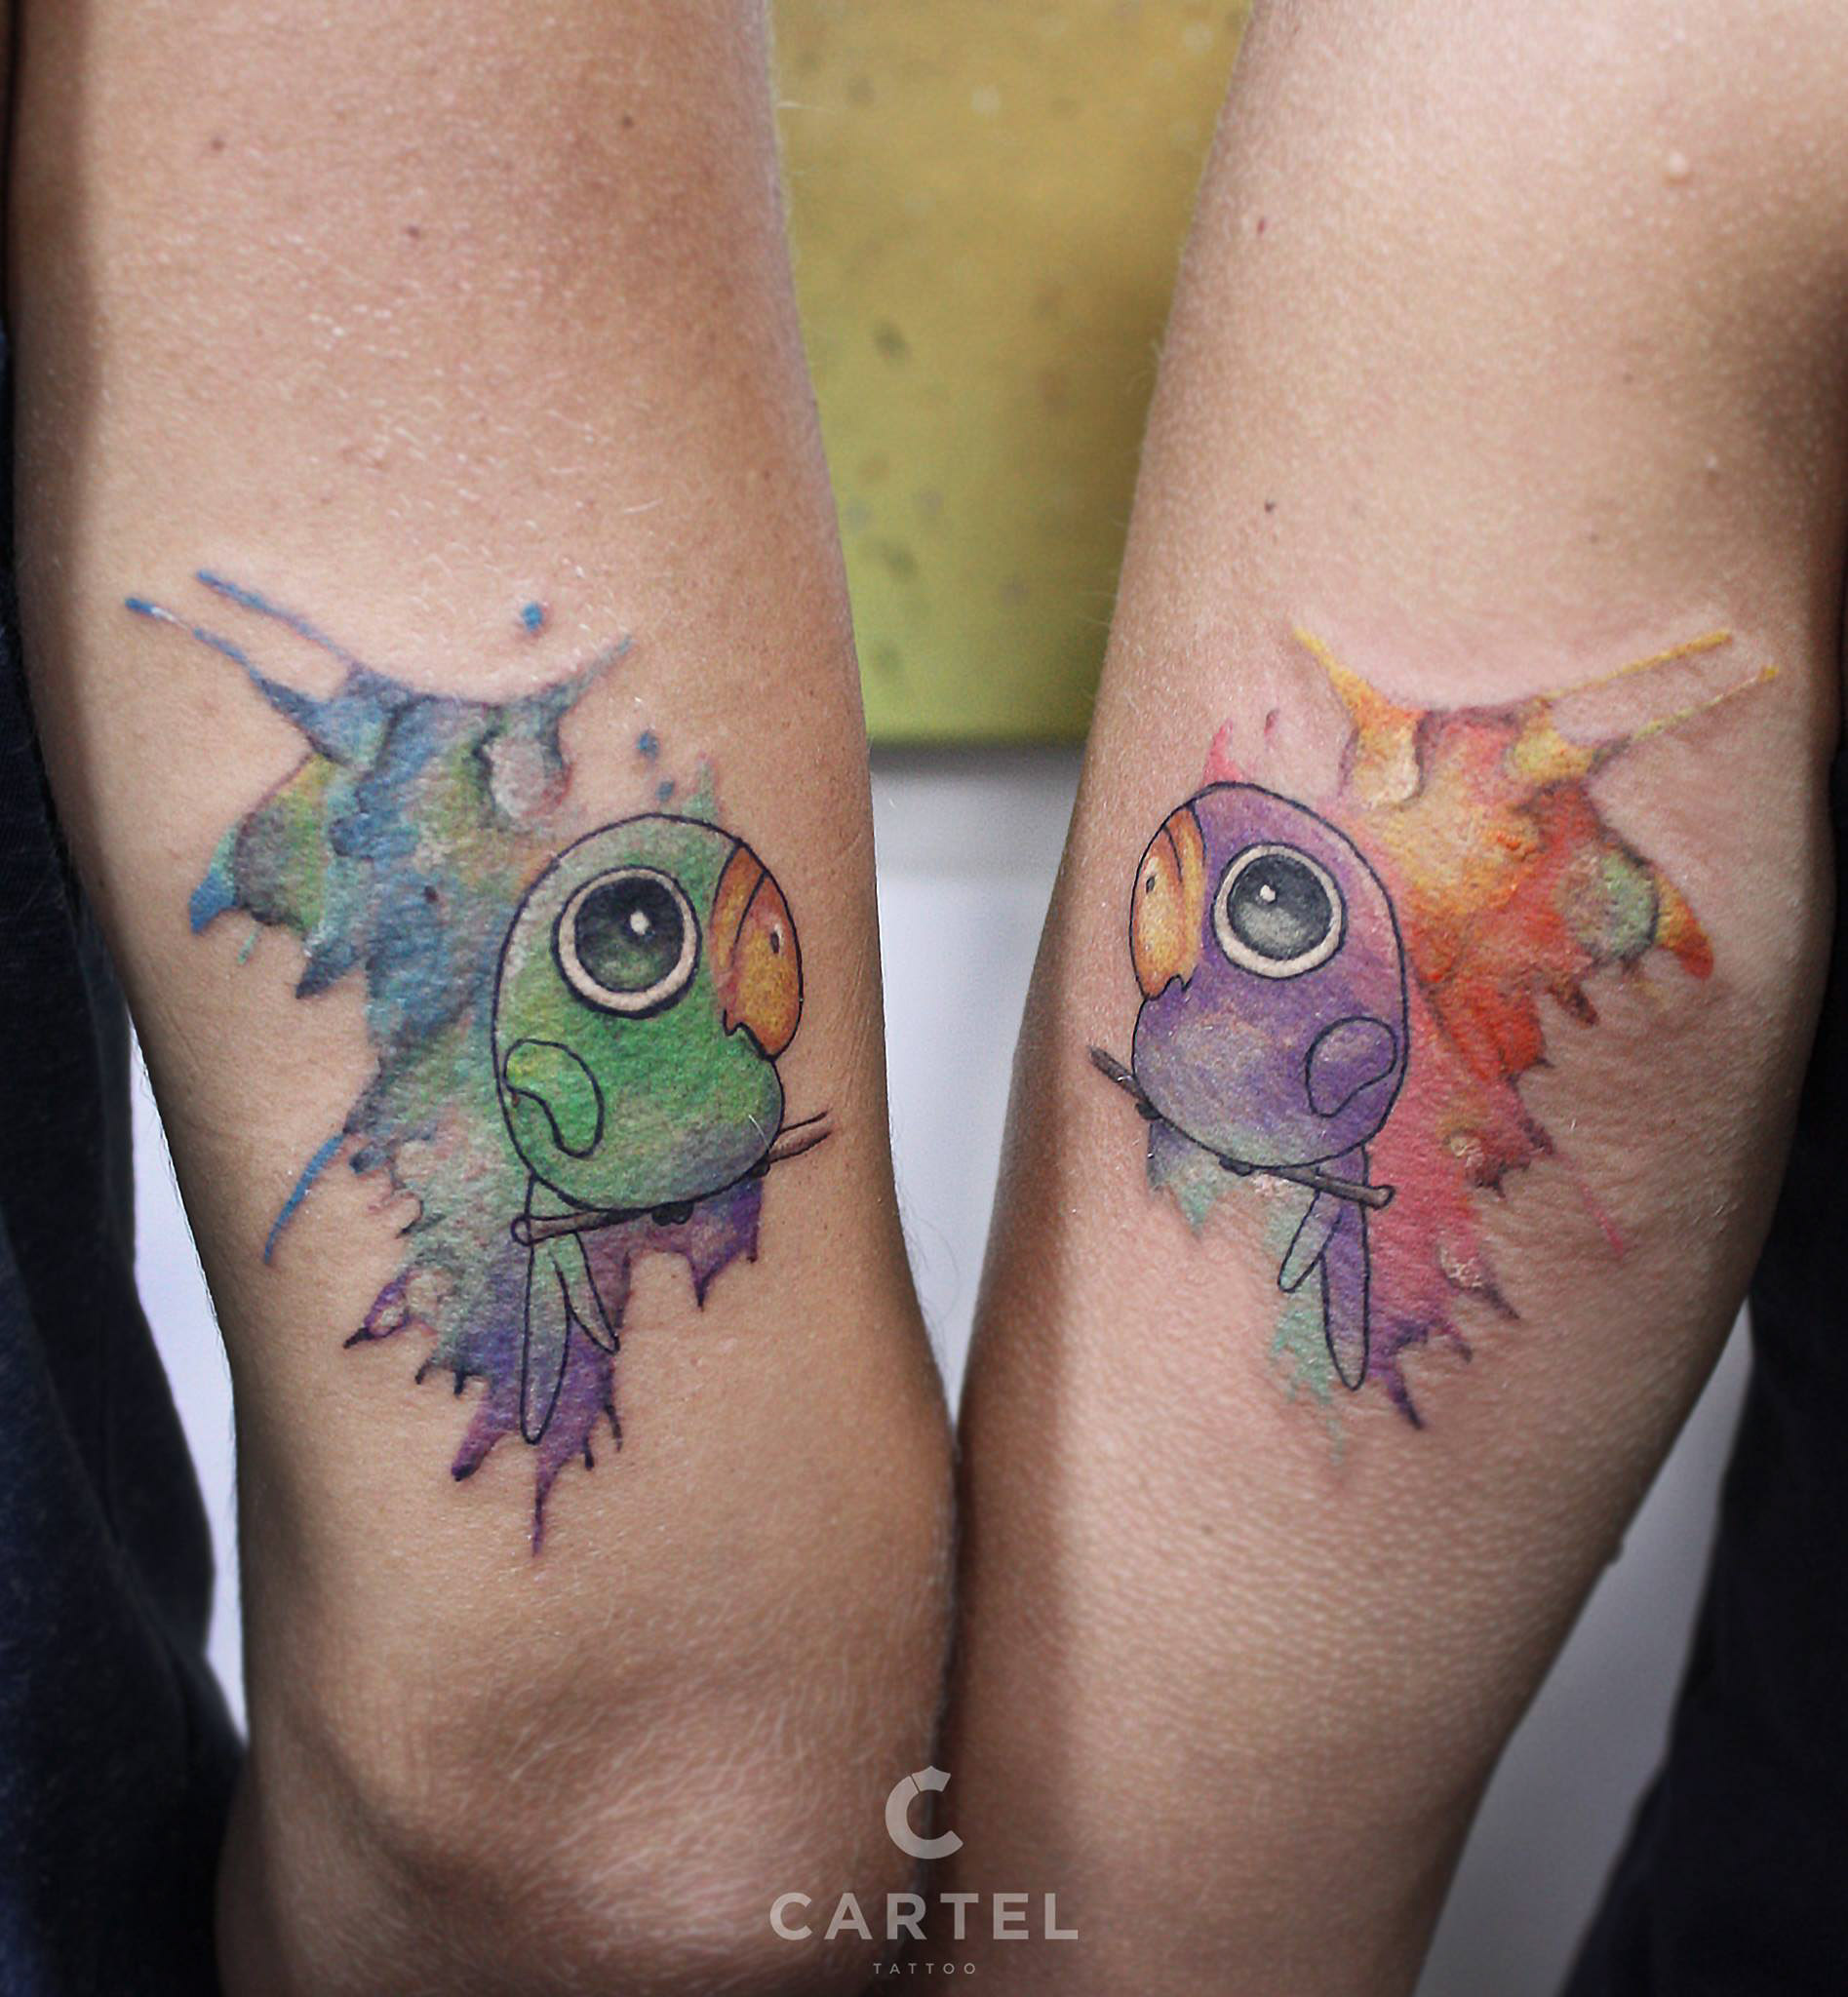 Nancy Fine Line Watercolor Tattoo (@nancy_dongtattoo) • Instagram photos  and videos